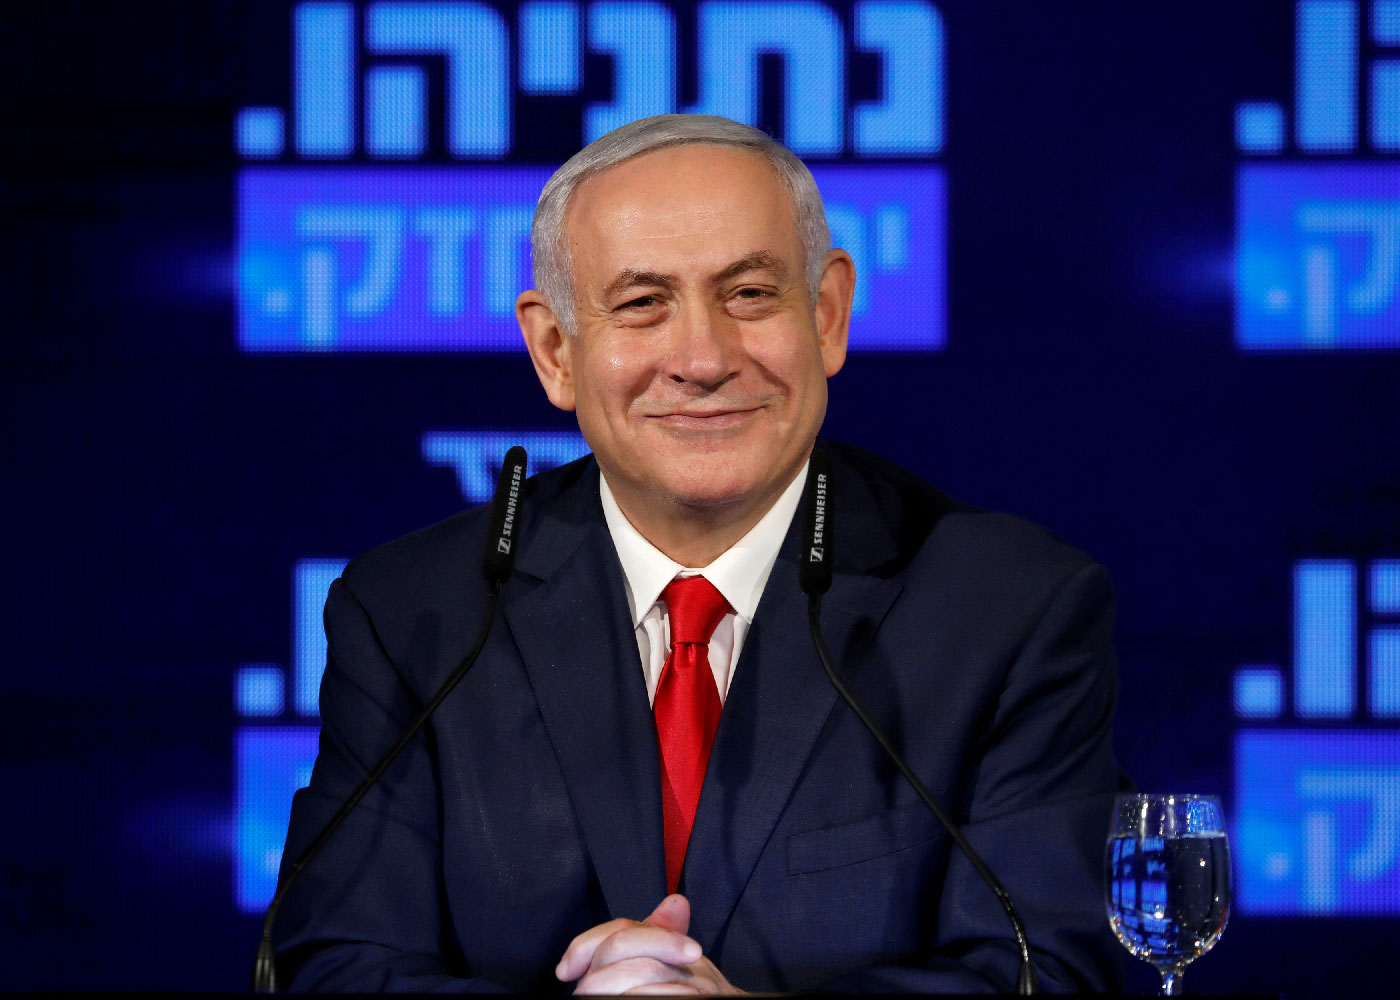 Israeli Prime Minister Benjamin Netanyahu delivers a speech at the launch of Likud party election campaign in Ramat Gan, Israel March 4, 2019.